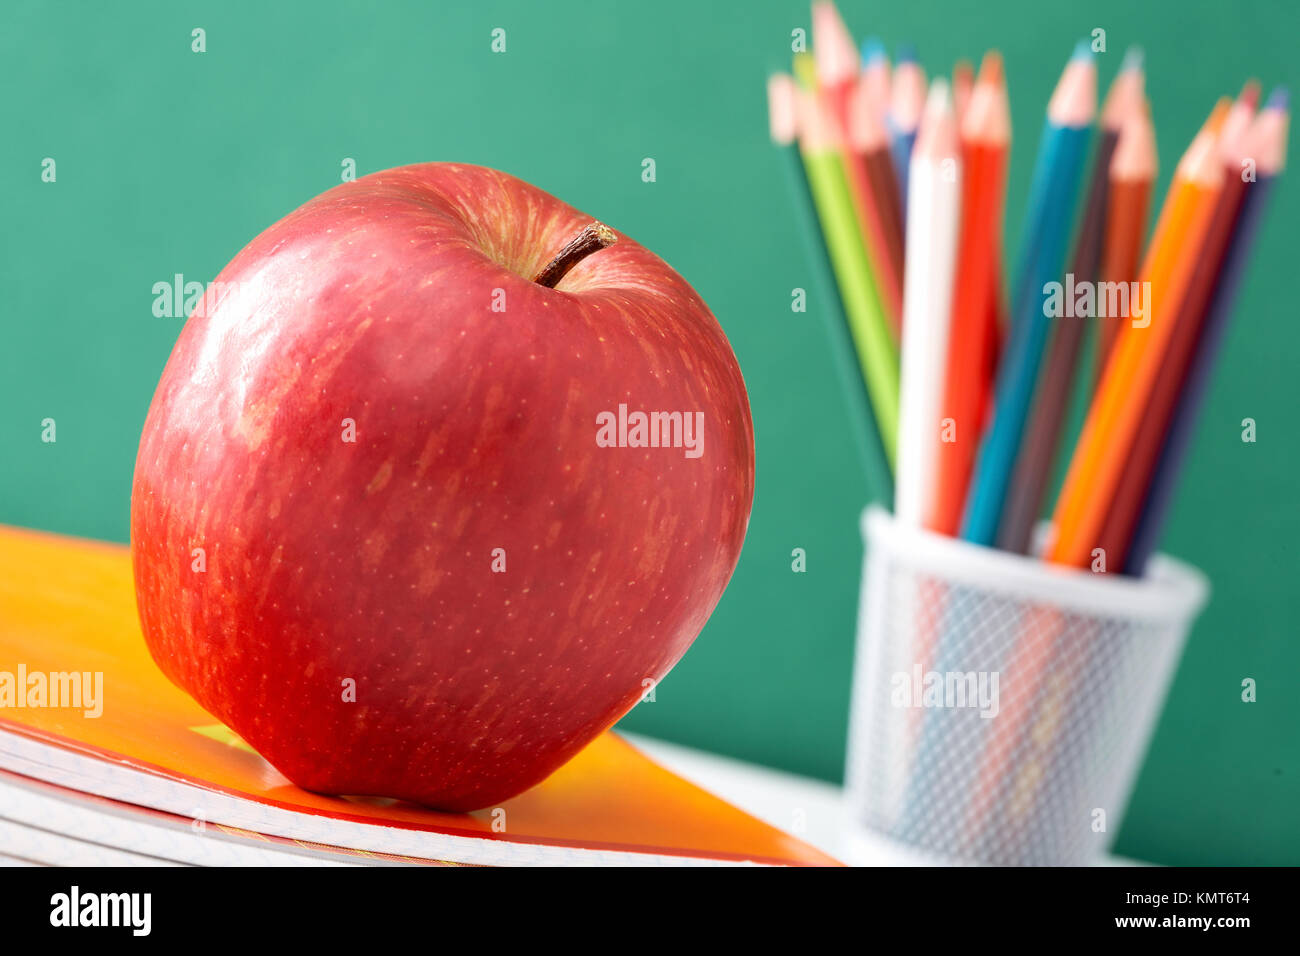 Close-up of big red apple on stack of copybooks with colorful pencils on background Stock Photo